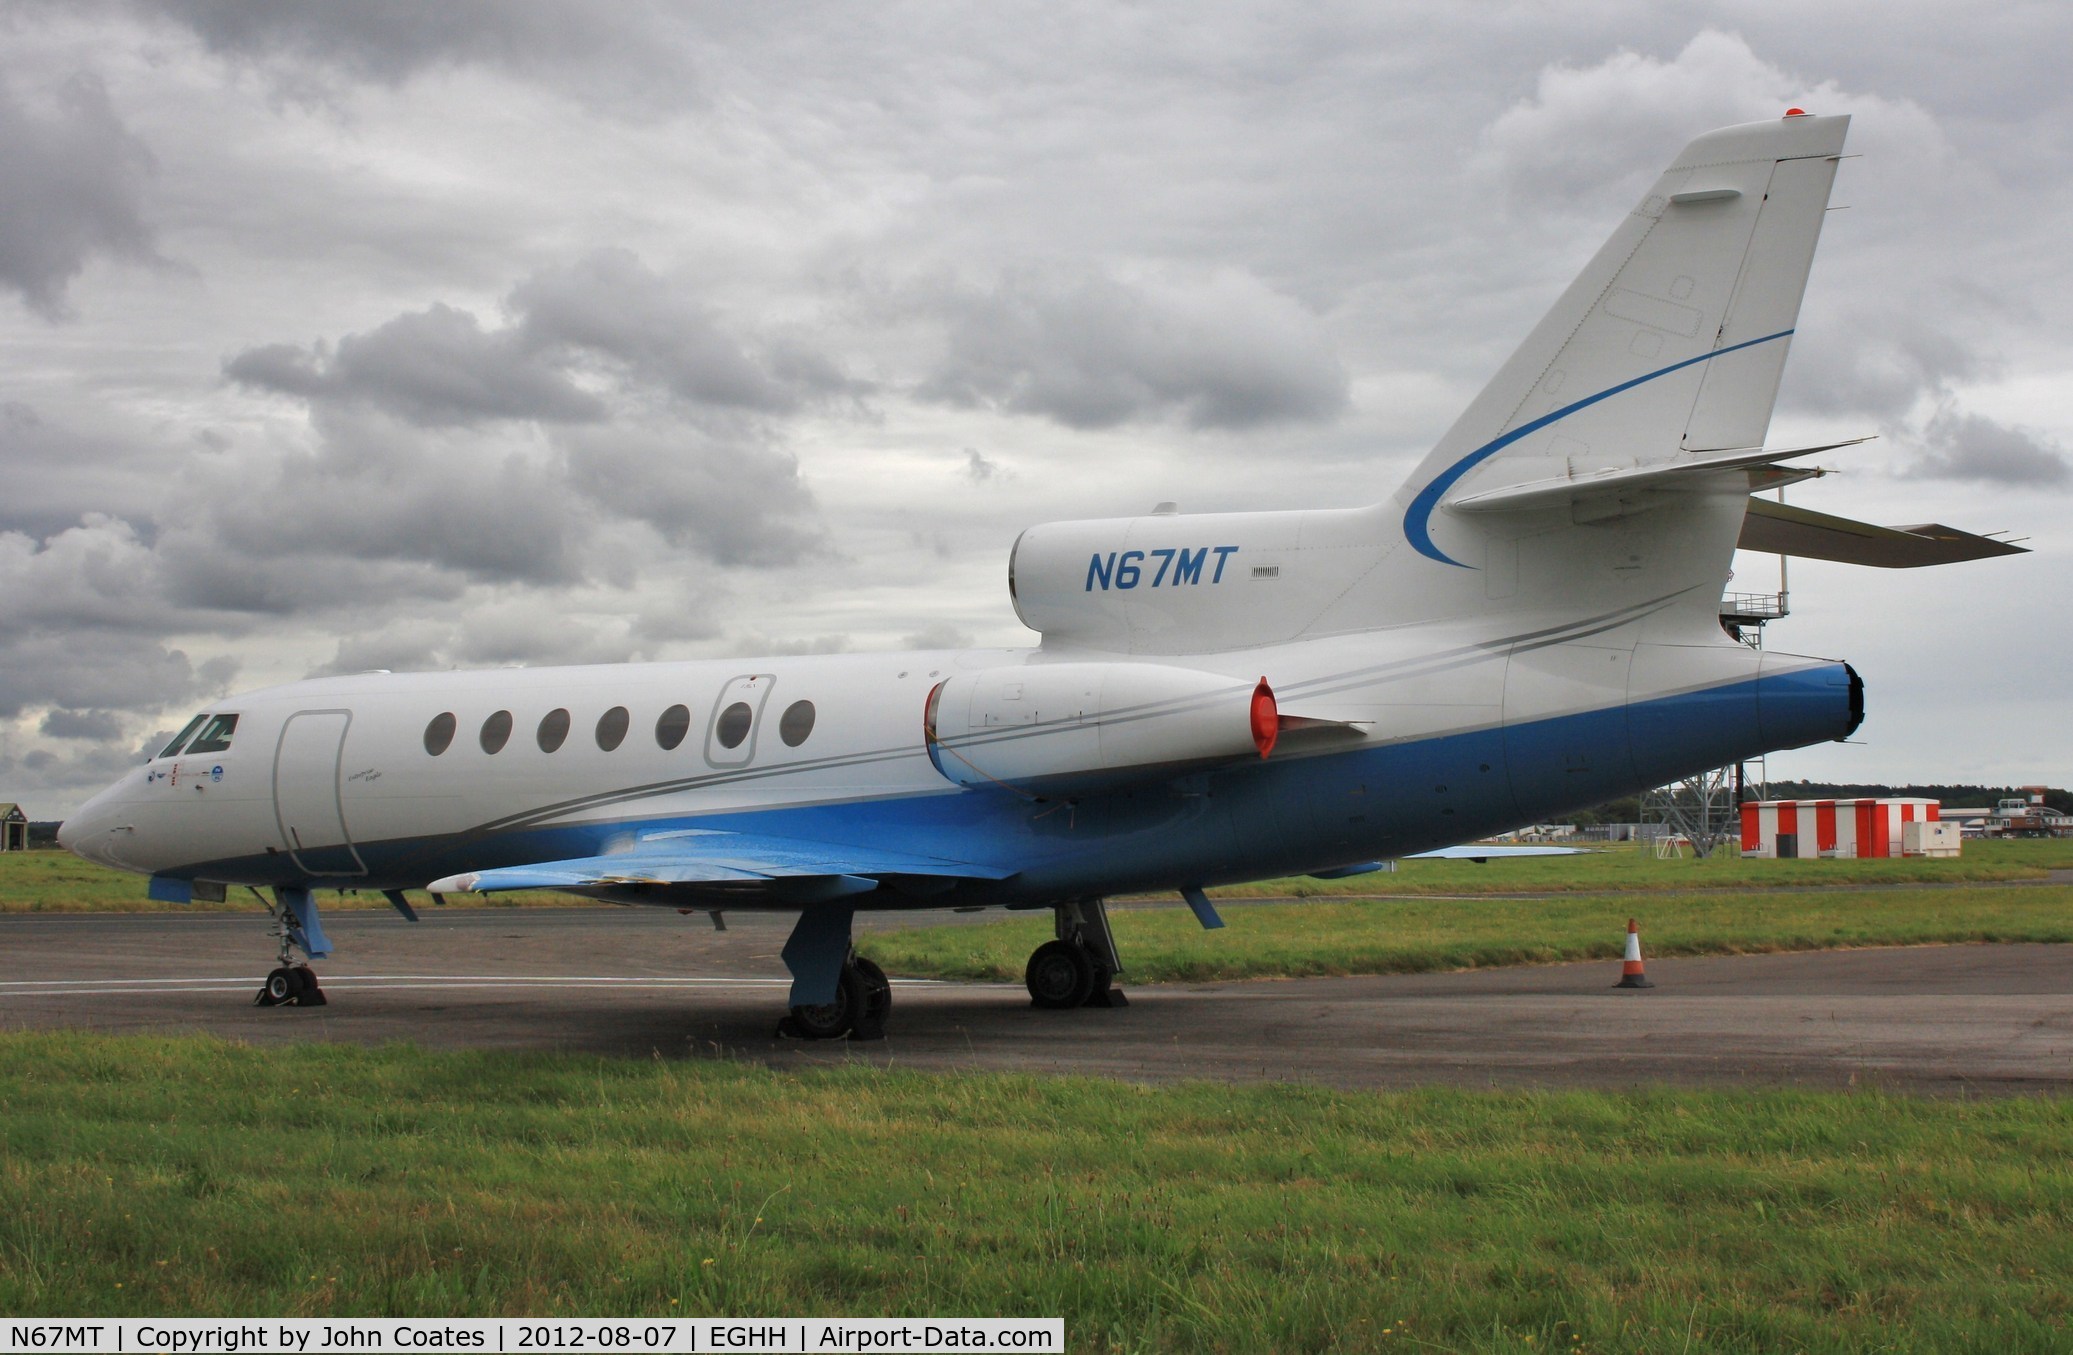 N67MT, 1996 Dassault Mystere Falcon 50 C/N 254, At Sigs